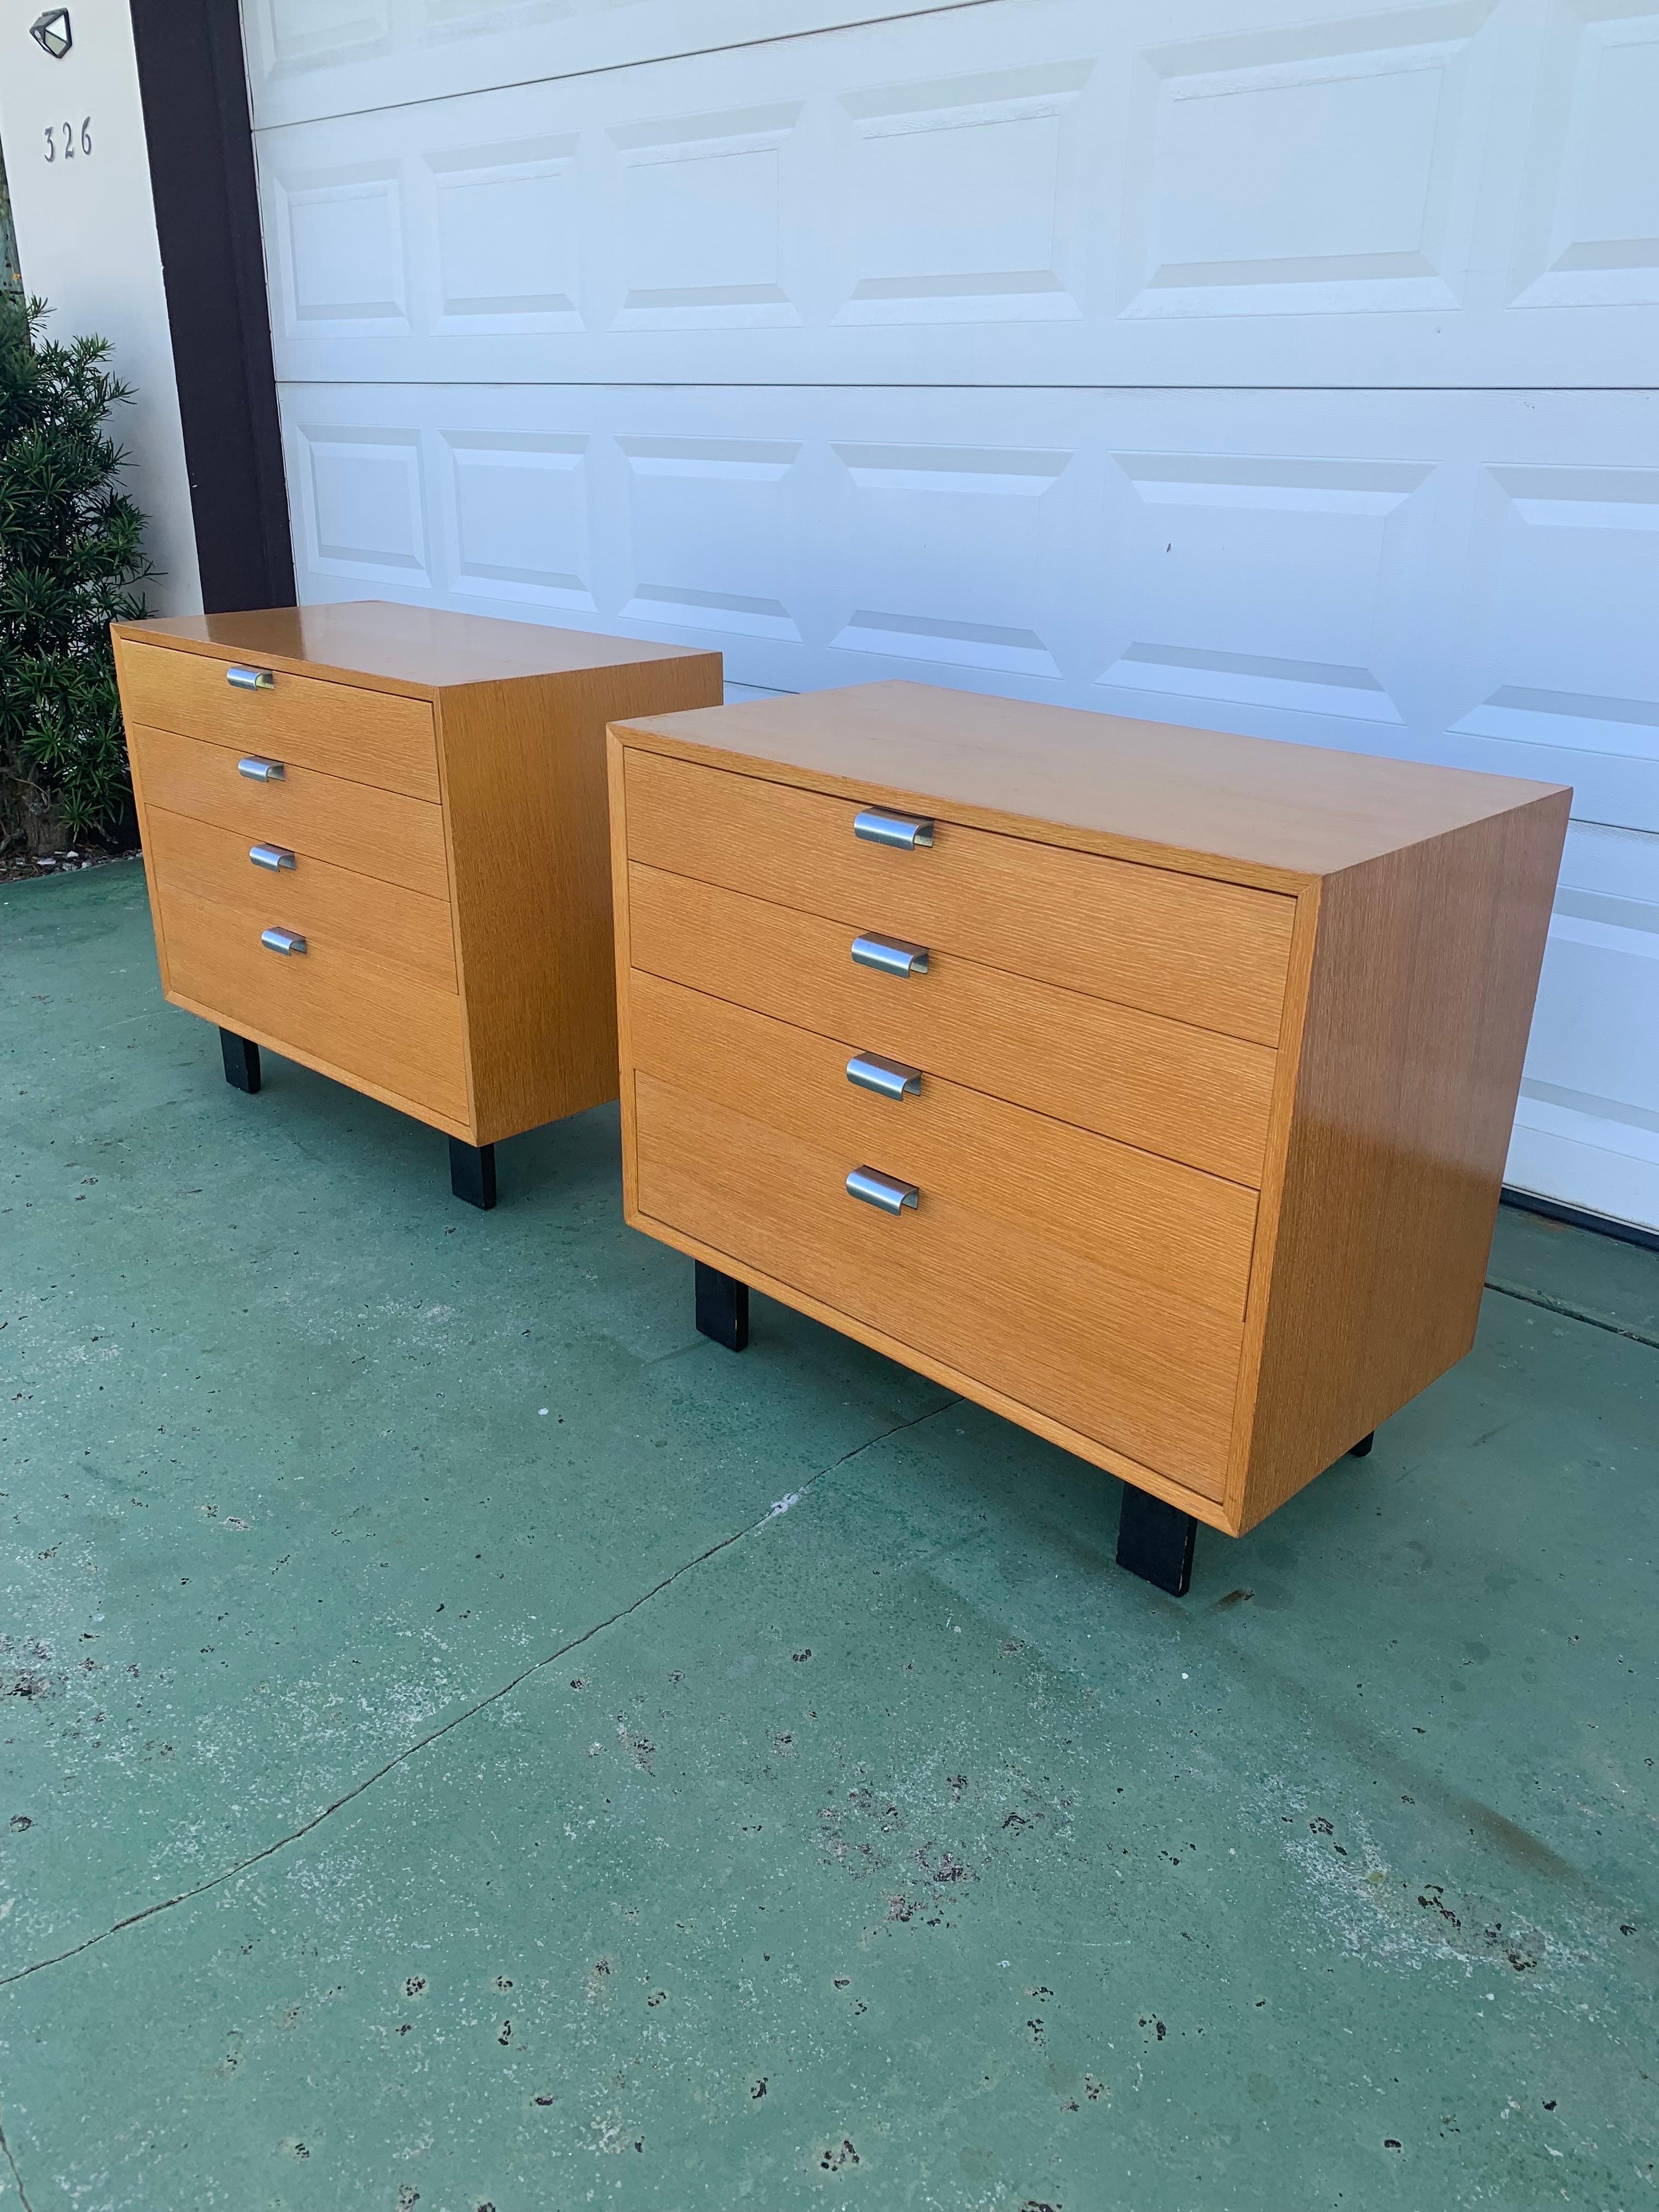 A beautiful pair of dressers designed by George Nelson for Herman Miller. Finished in a spectacular combed oak veneer. One of the most lively, beautiful, vibrant veneers we’ve ever seen.

Metal over hang pulls and the cases sit on thick sturdy black